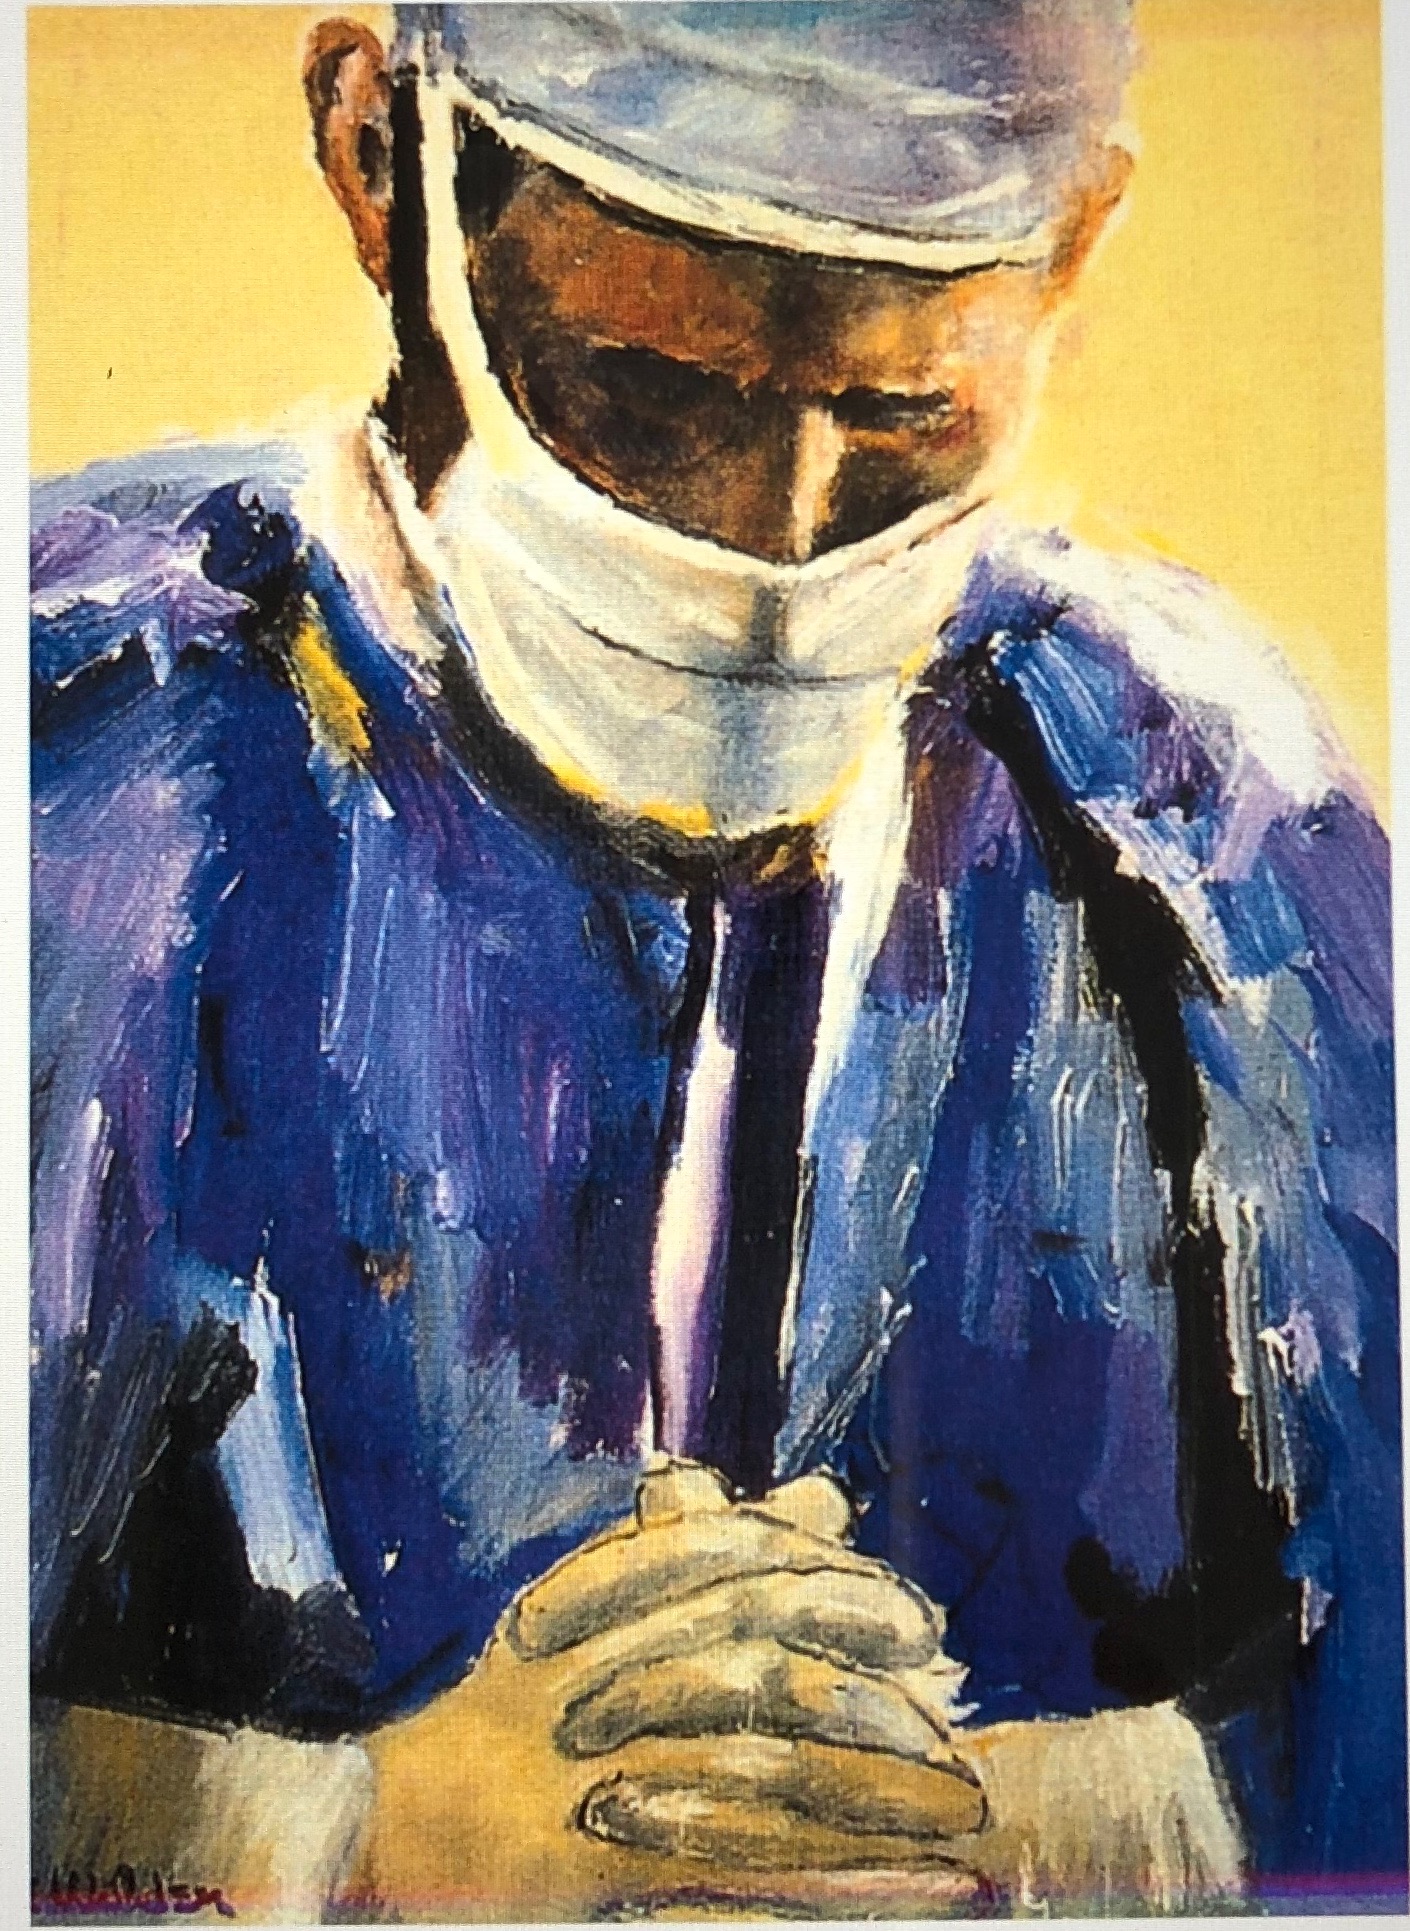 Reflections of a Surgeon Medical Art